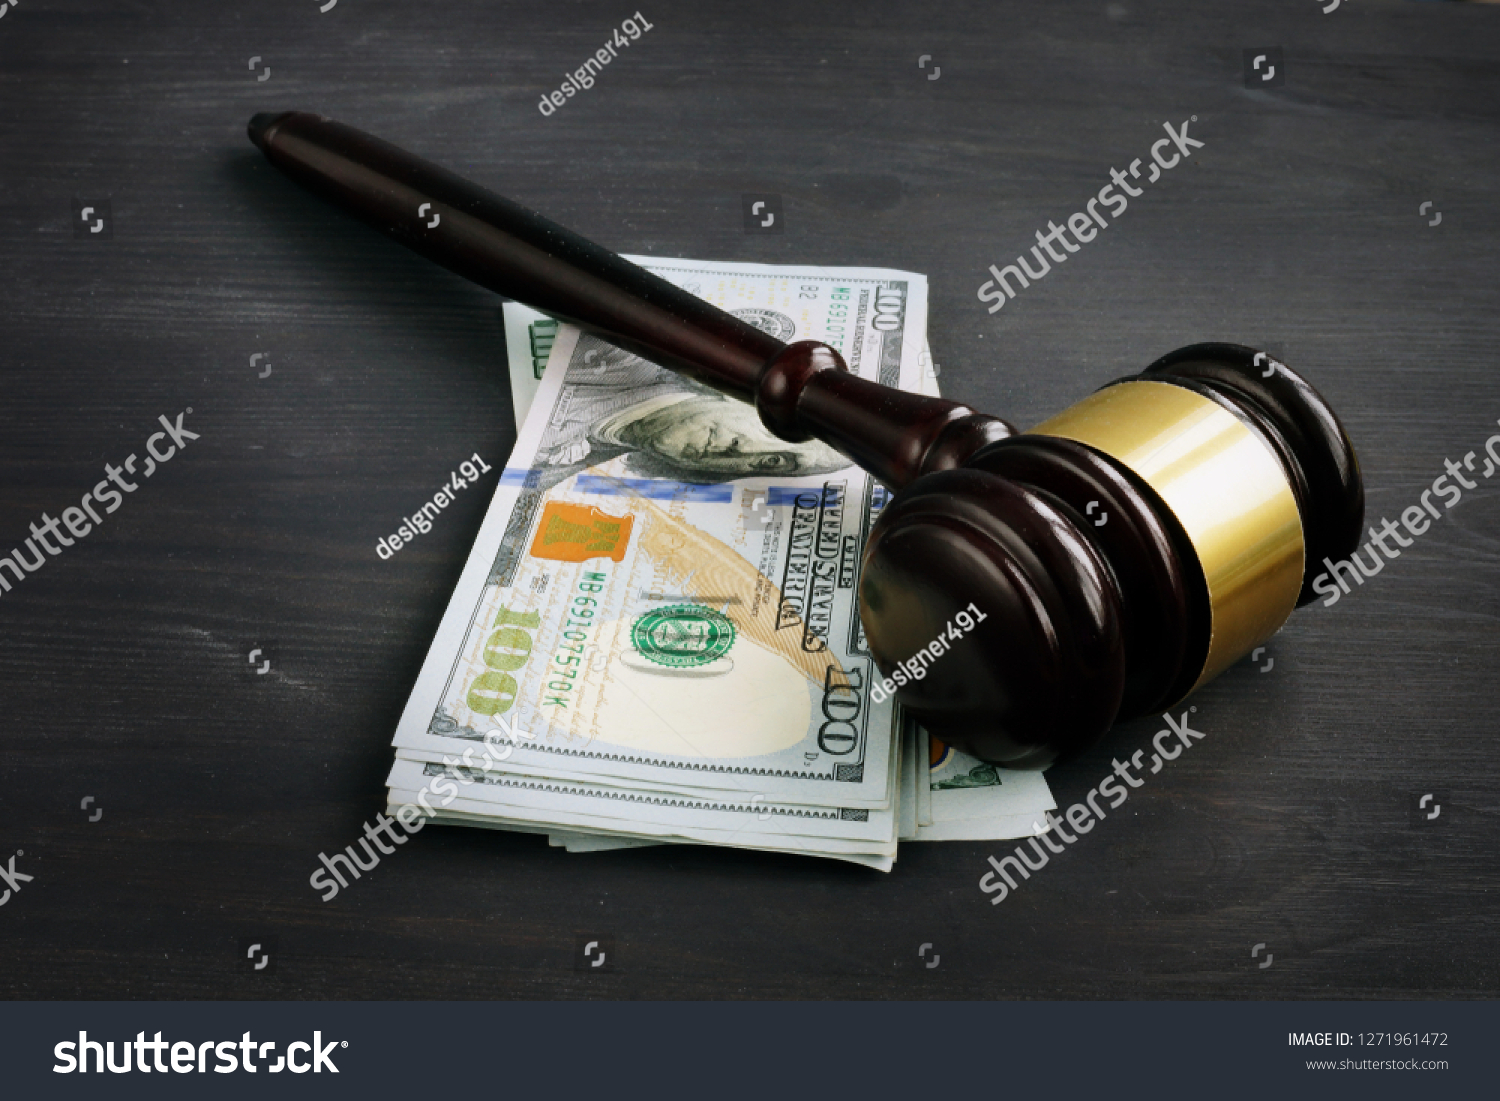 Gavel and money in the court. Penalty or bribe. #1271961472